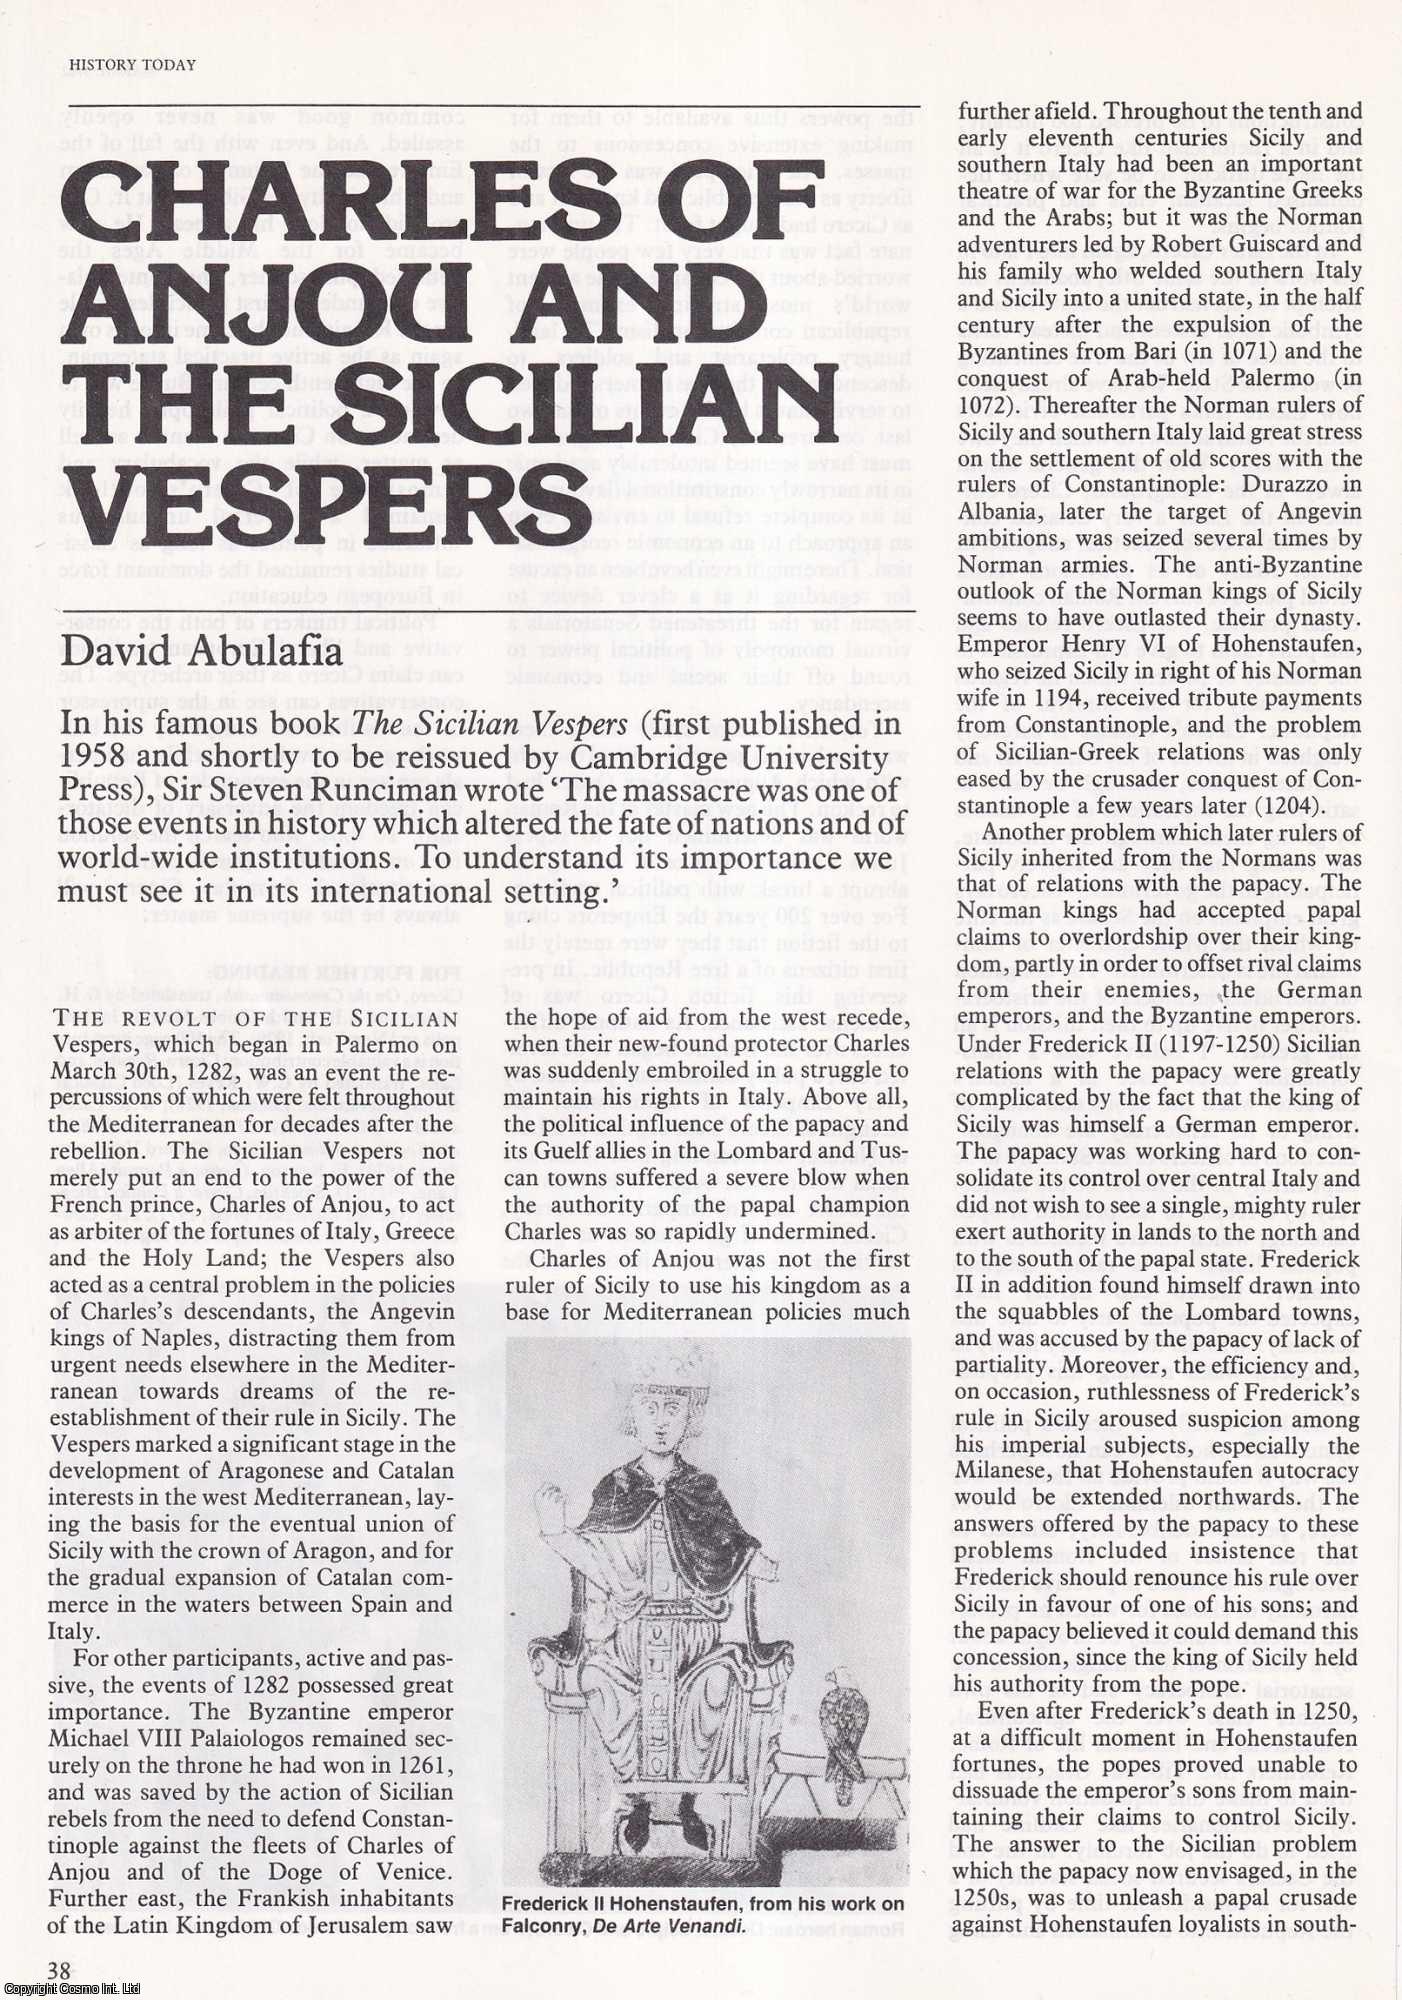 David Abulafia - Charles of Anjou & The Sicilian Vespers. An original article from History Today 1982.